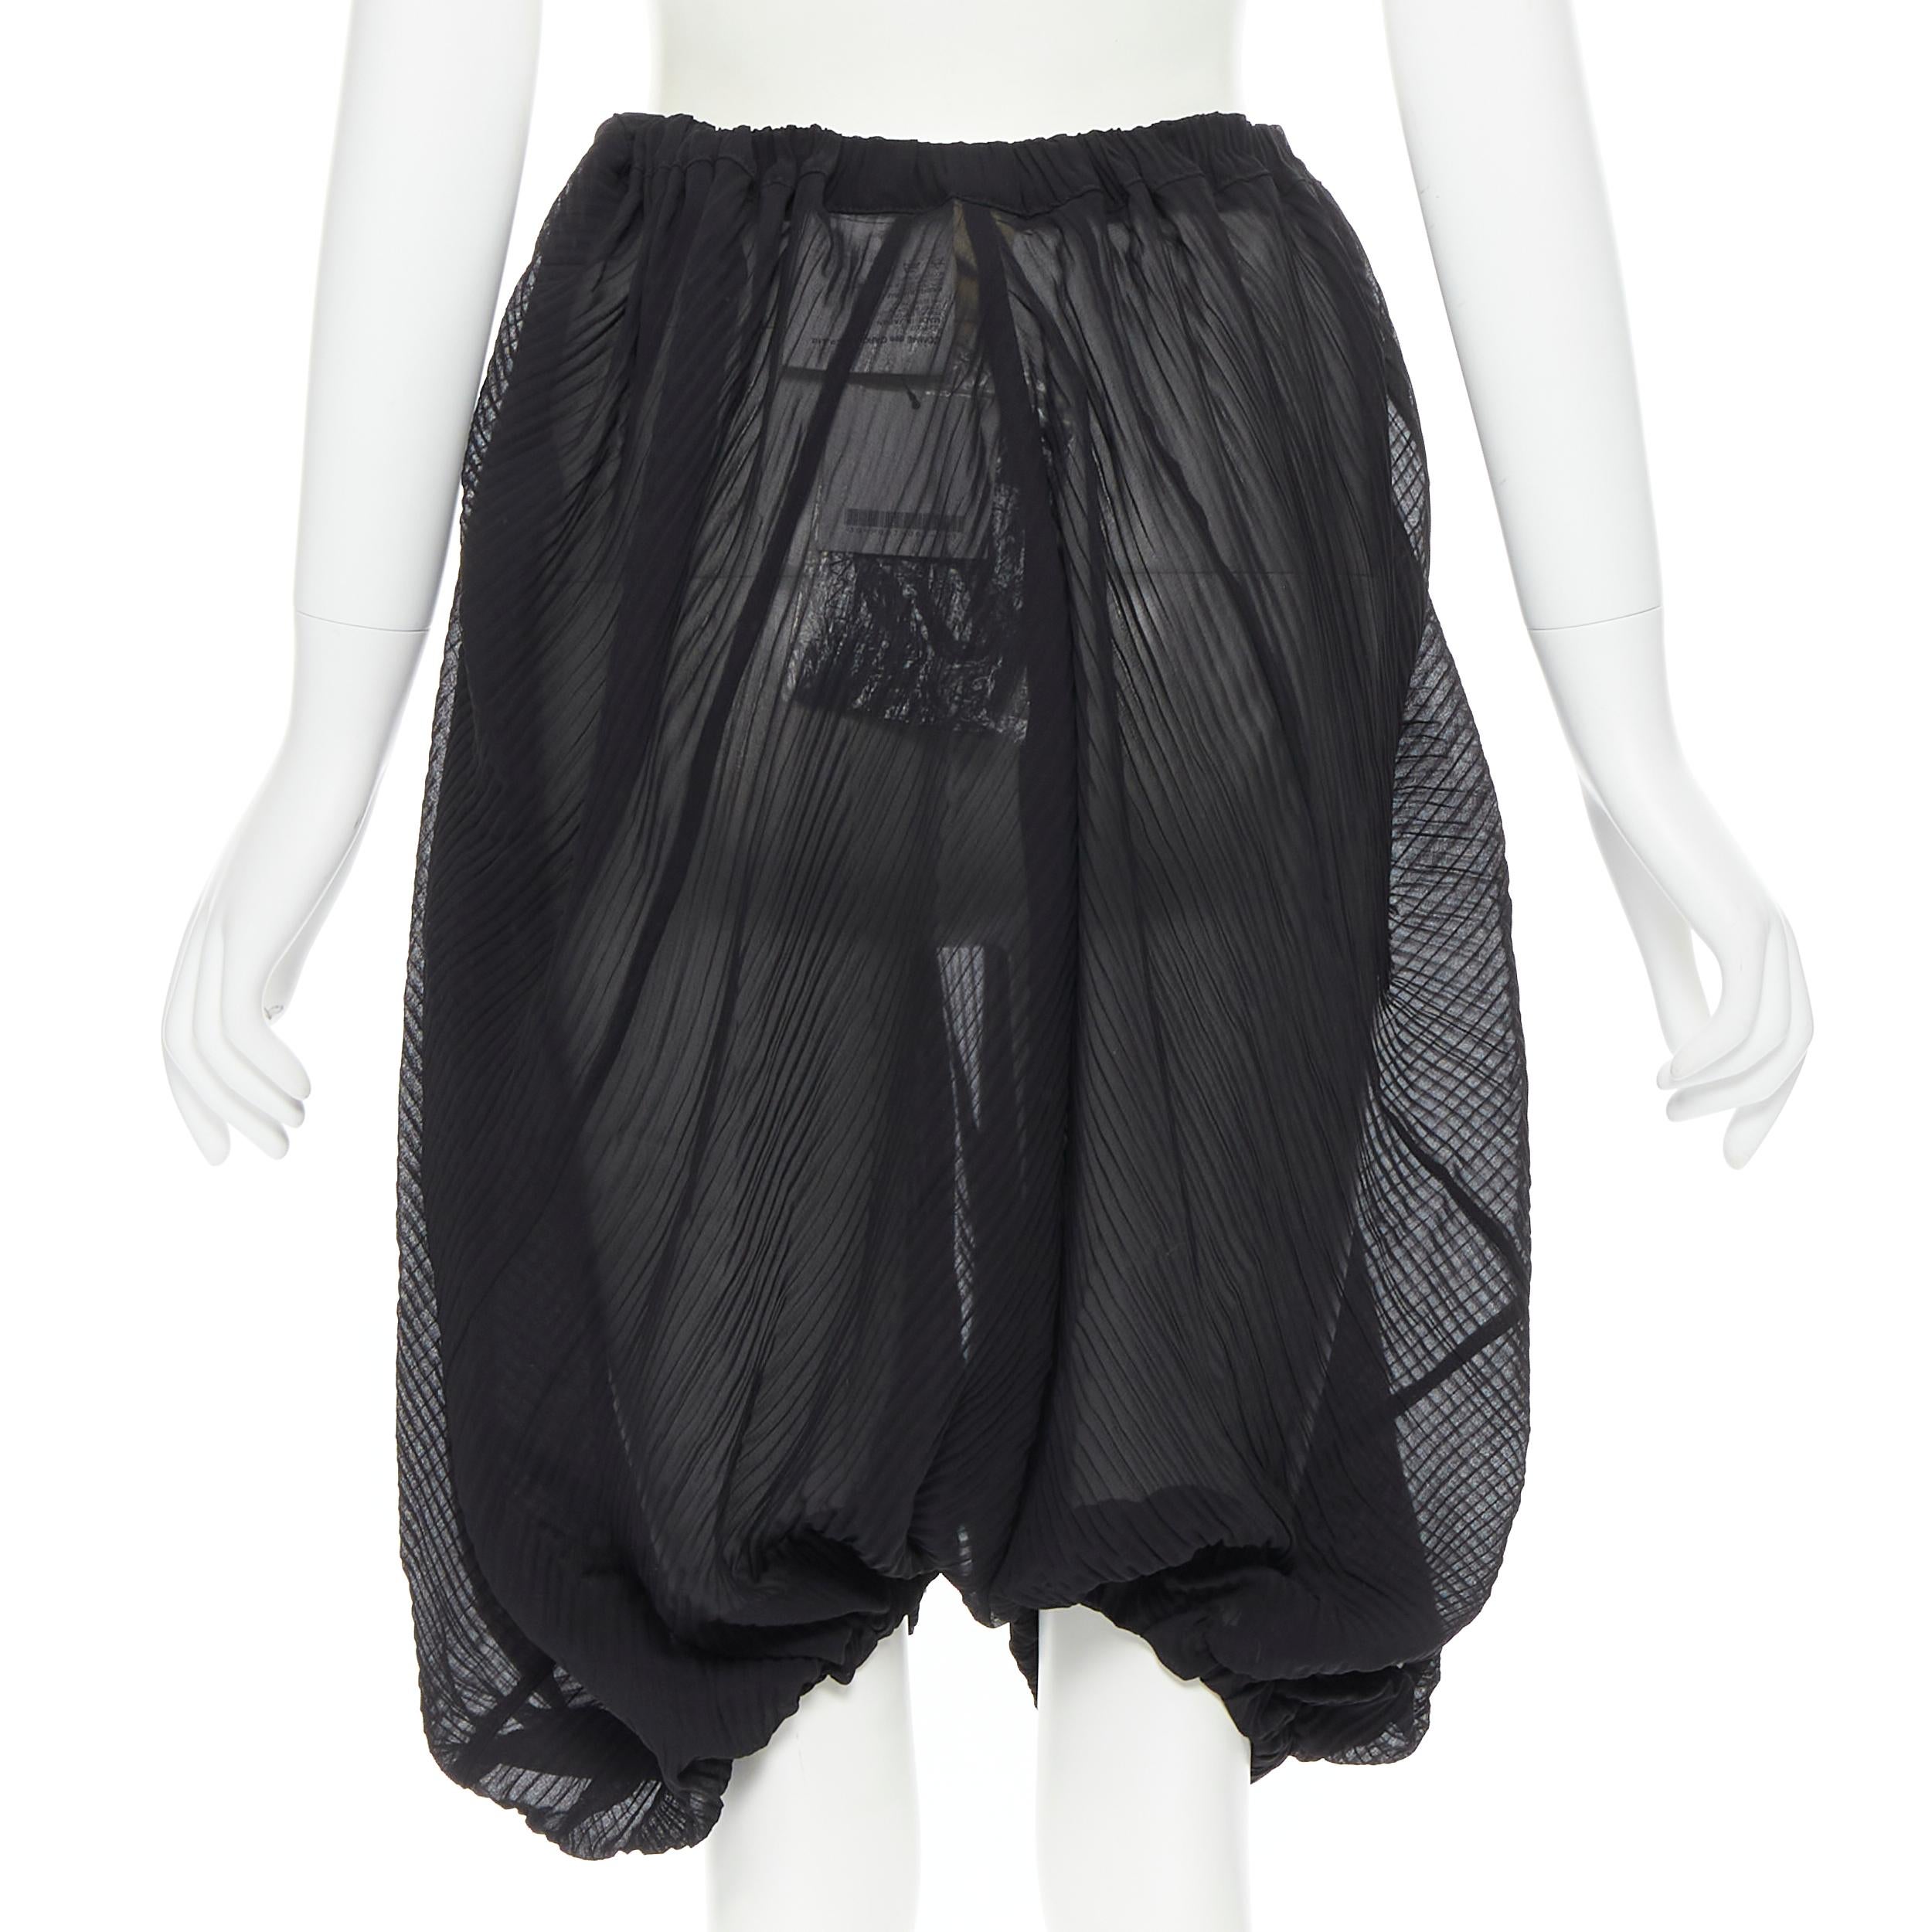 Women's new TAO COMME DES GARCONS black sheer pleated bubble elasticated shorts XS